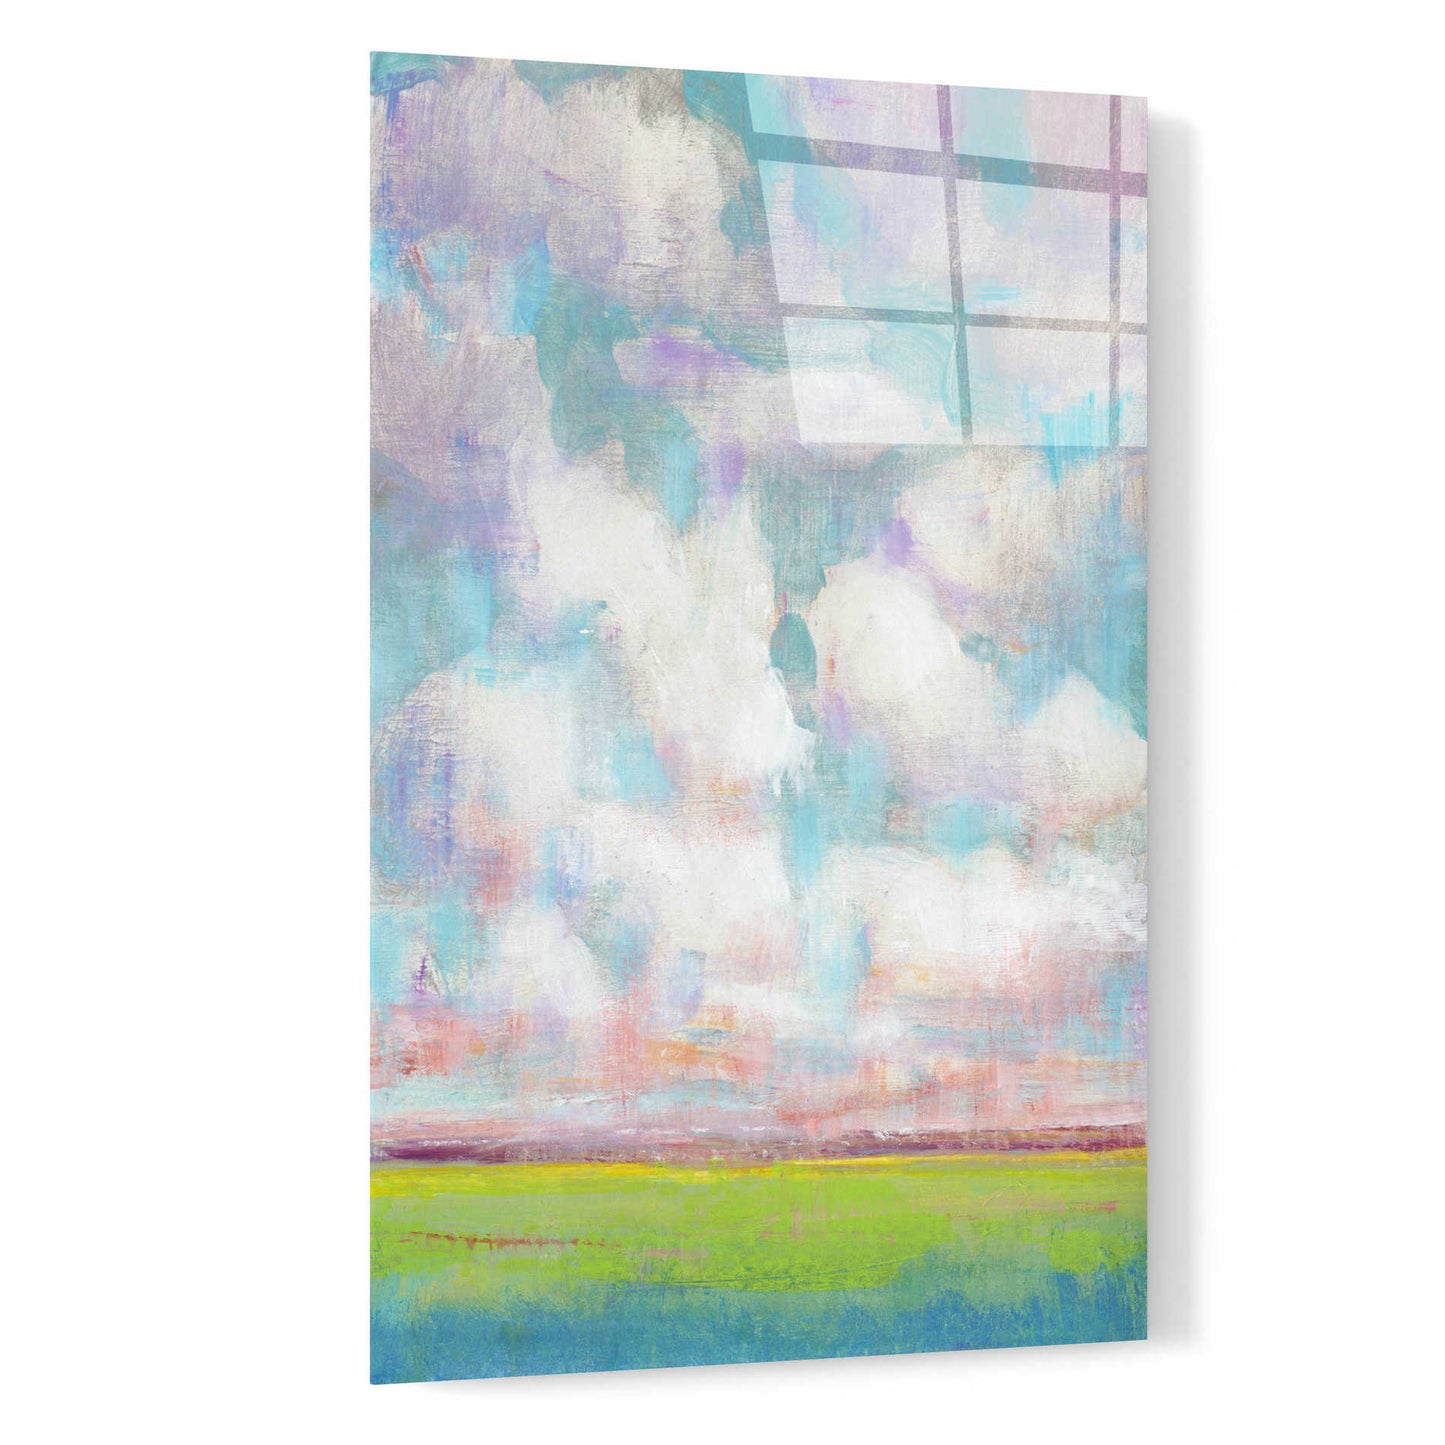 Epic Art 'Clouds in Motion I' by Tim O'Toole, Acrylic Glass Wall Art,16x24